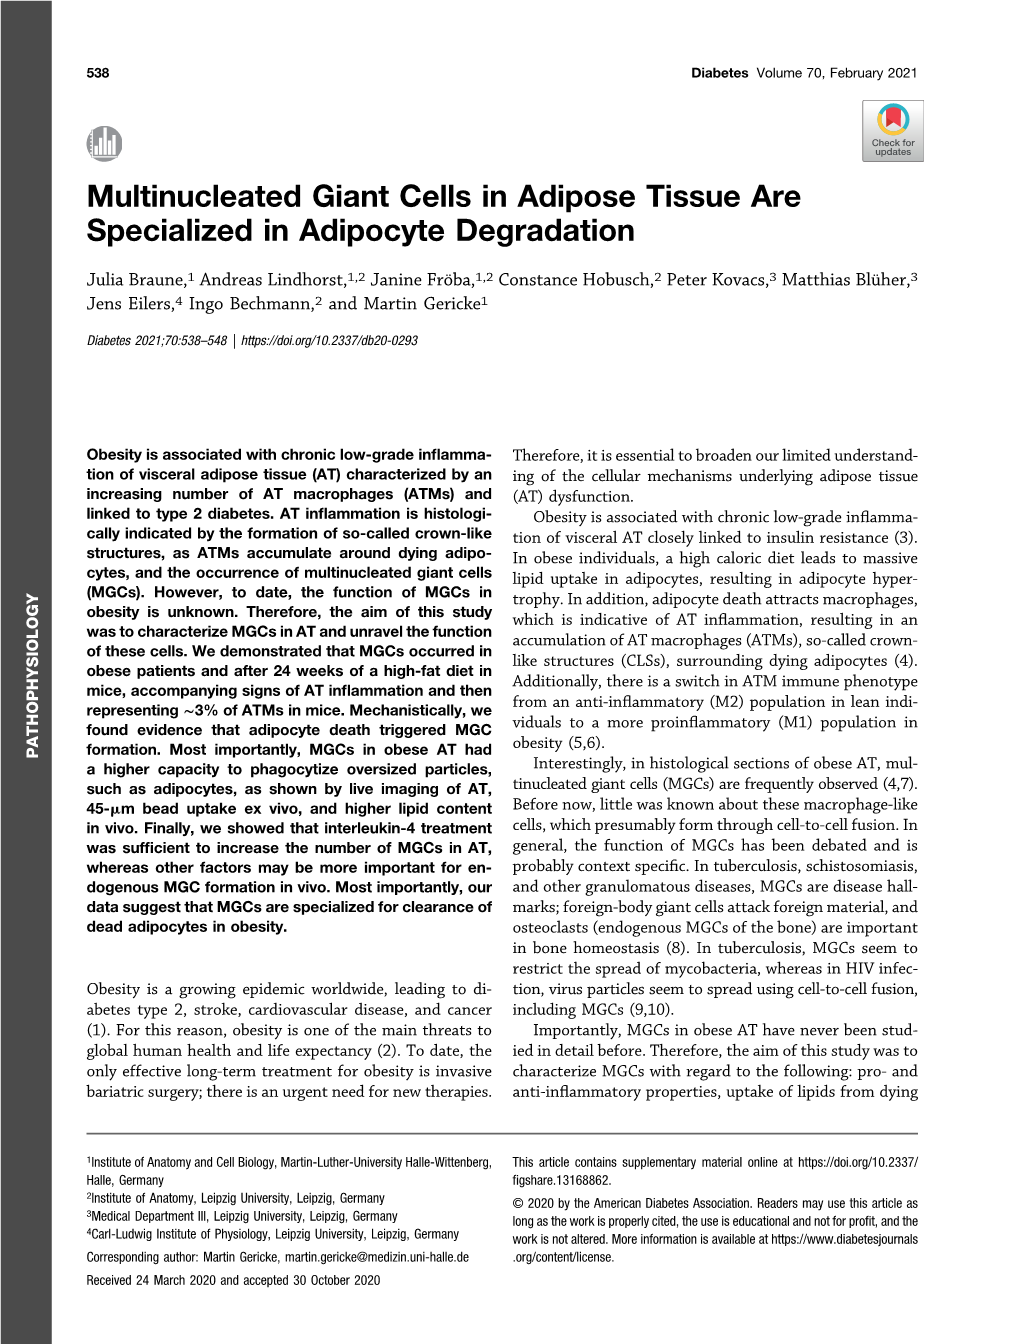 Multinucleated Giant Cells in Adipose Tissue Are Specialized in Adipocyte Degradation